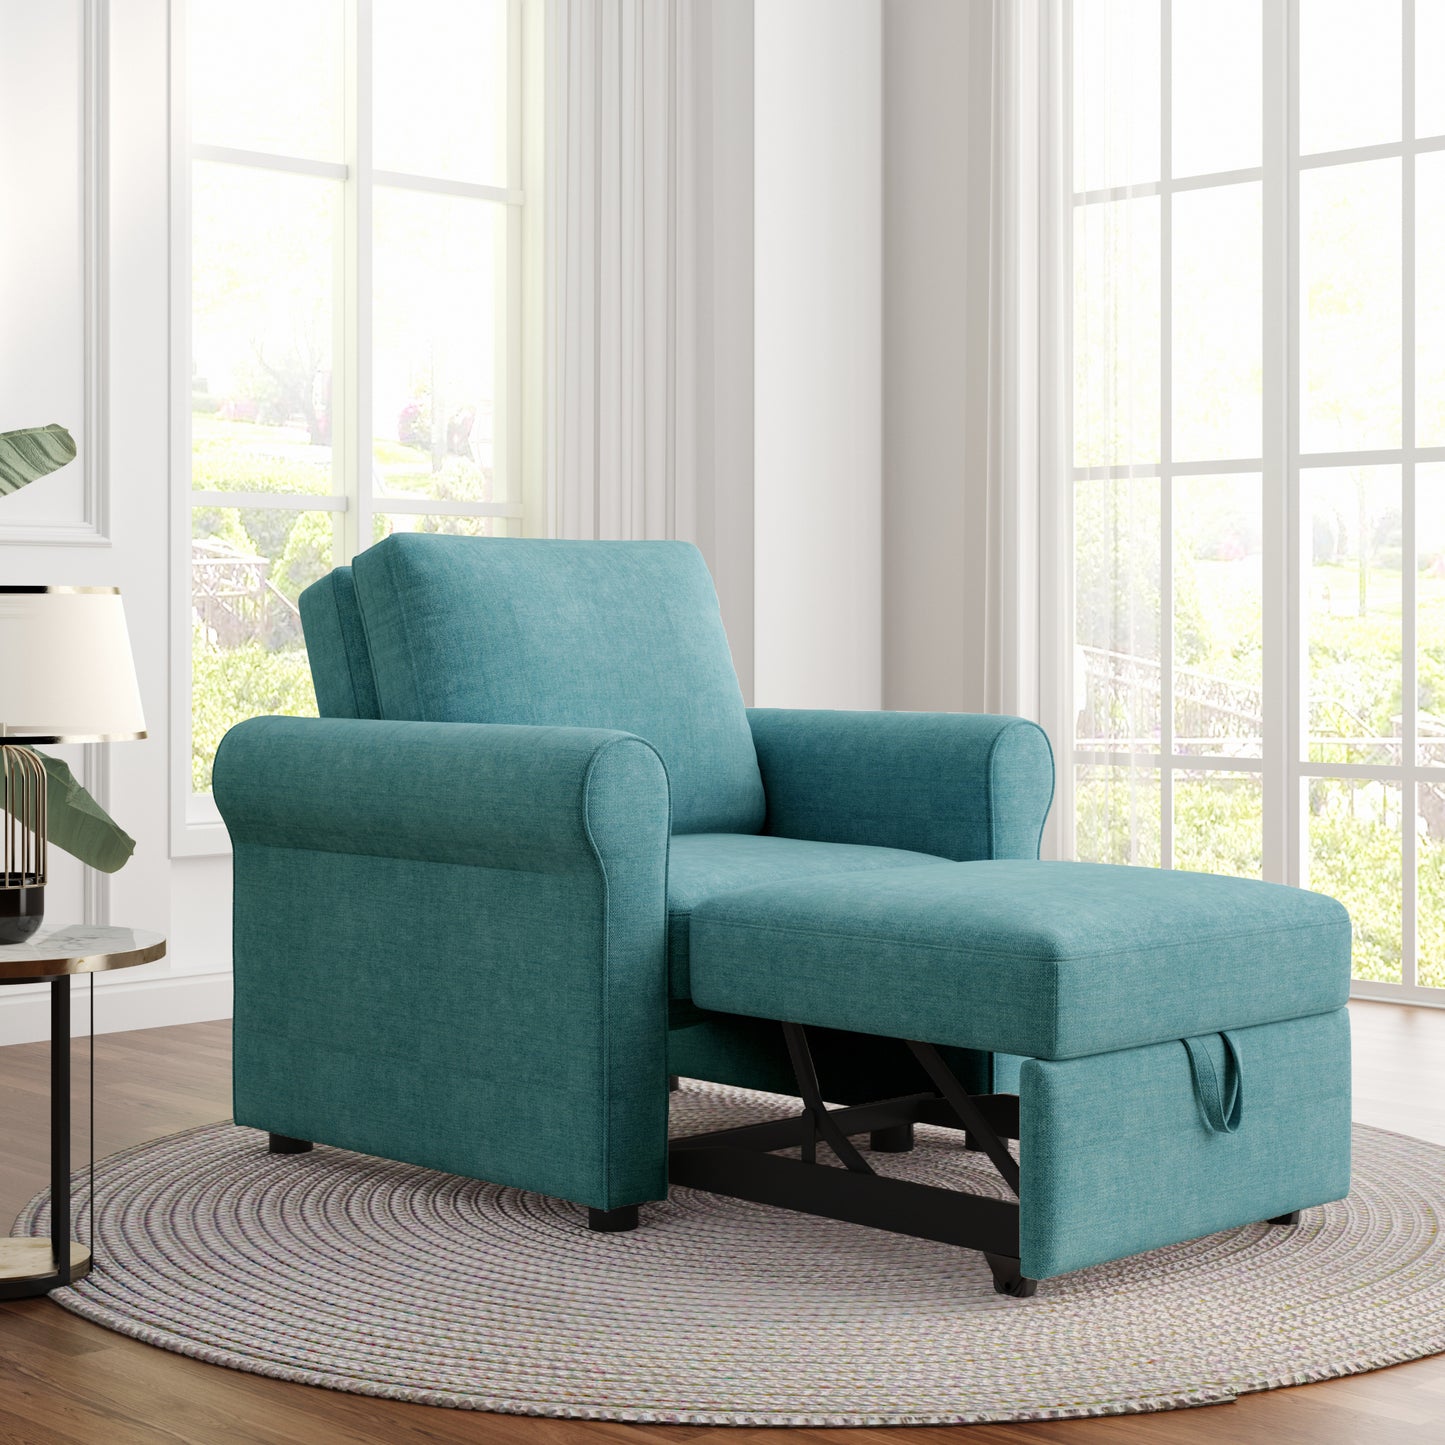 Teal 3-in-1 Convertible Sleeper Chair Bed